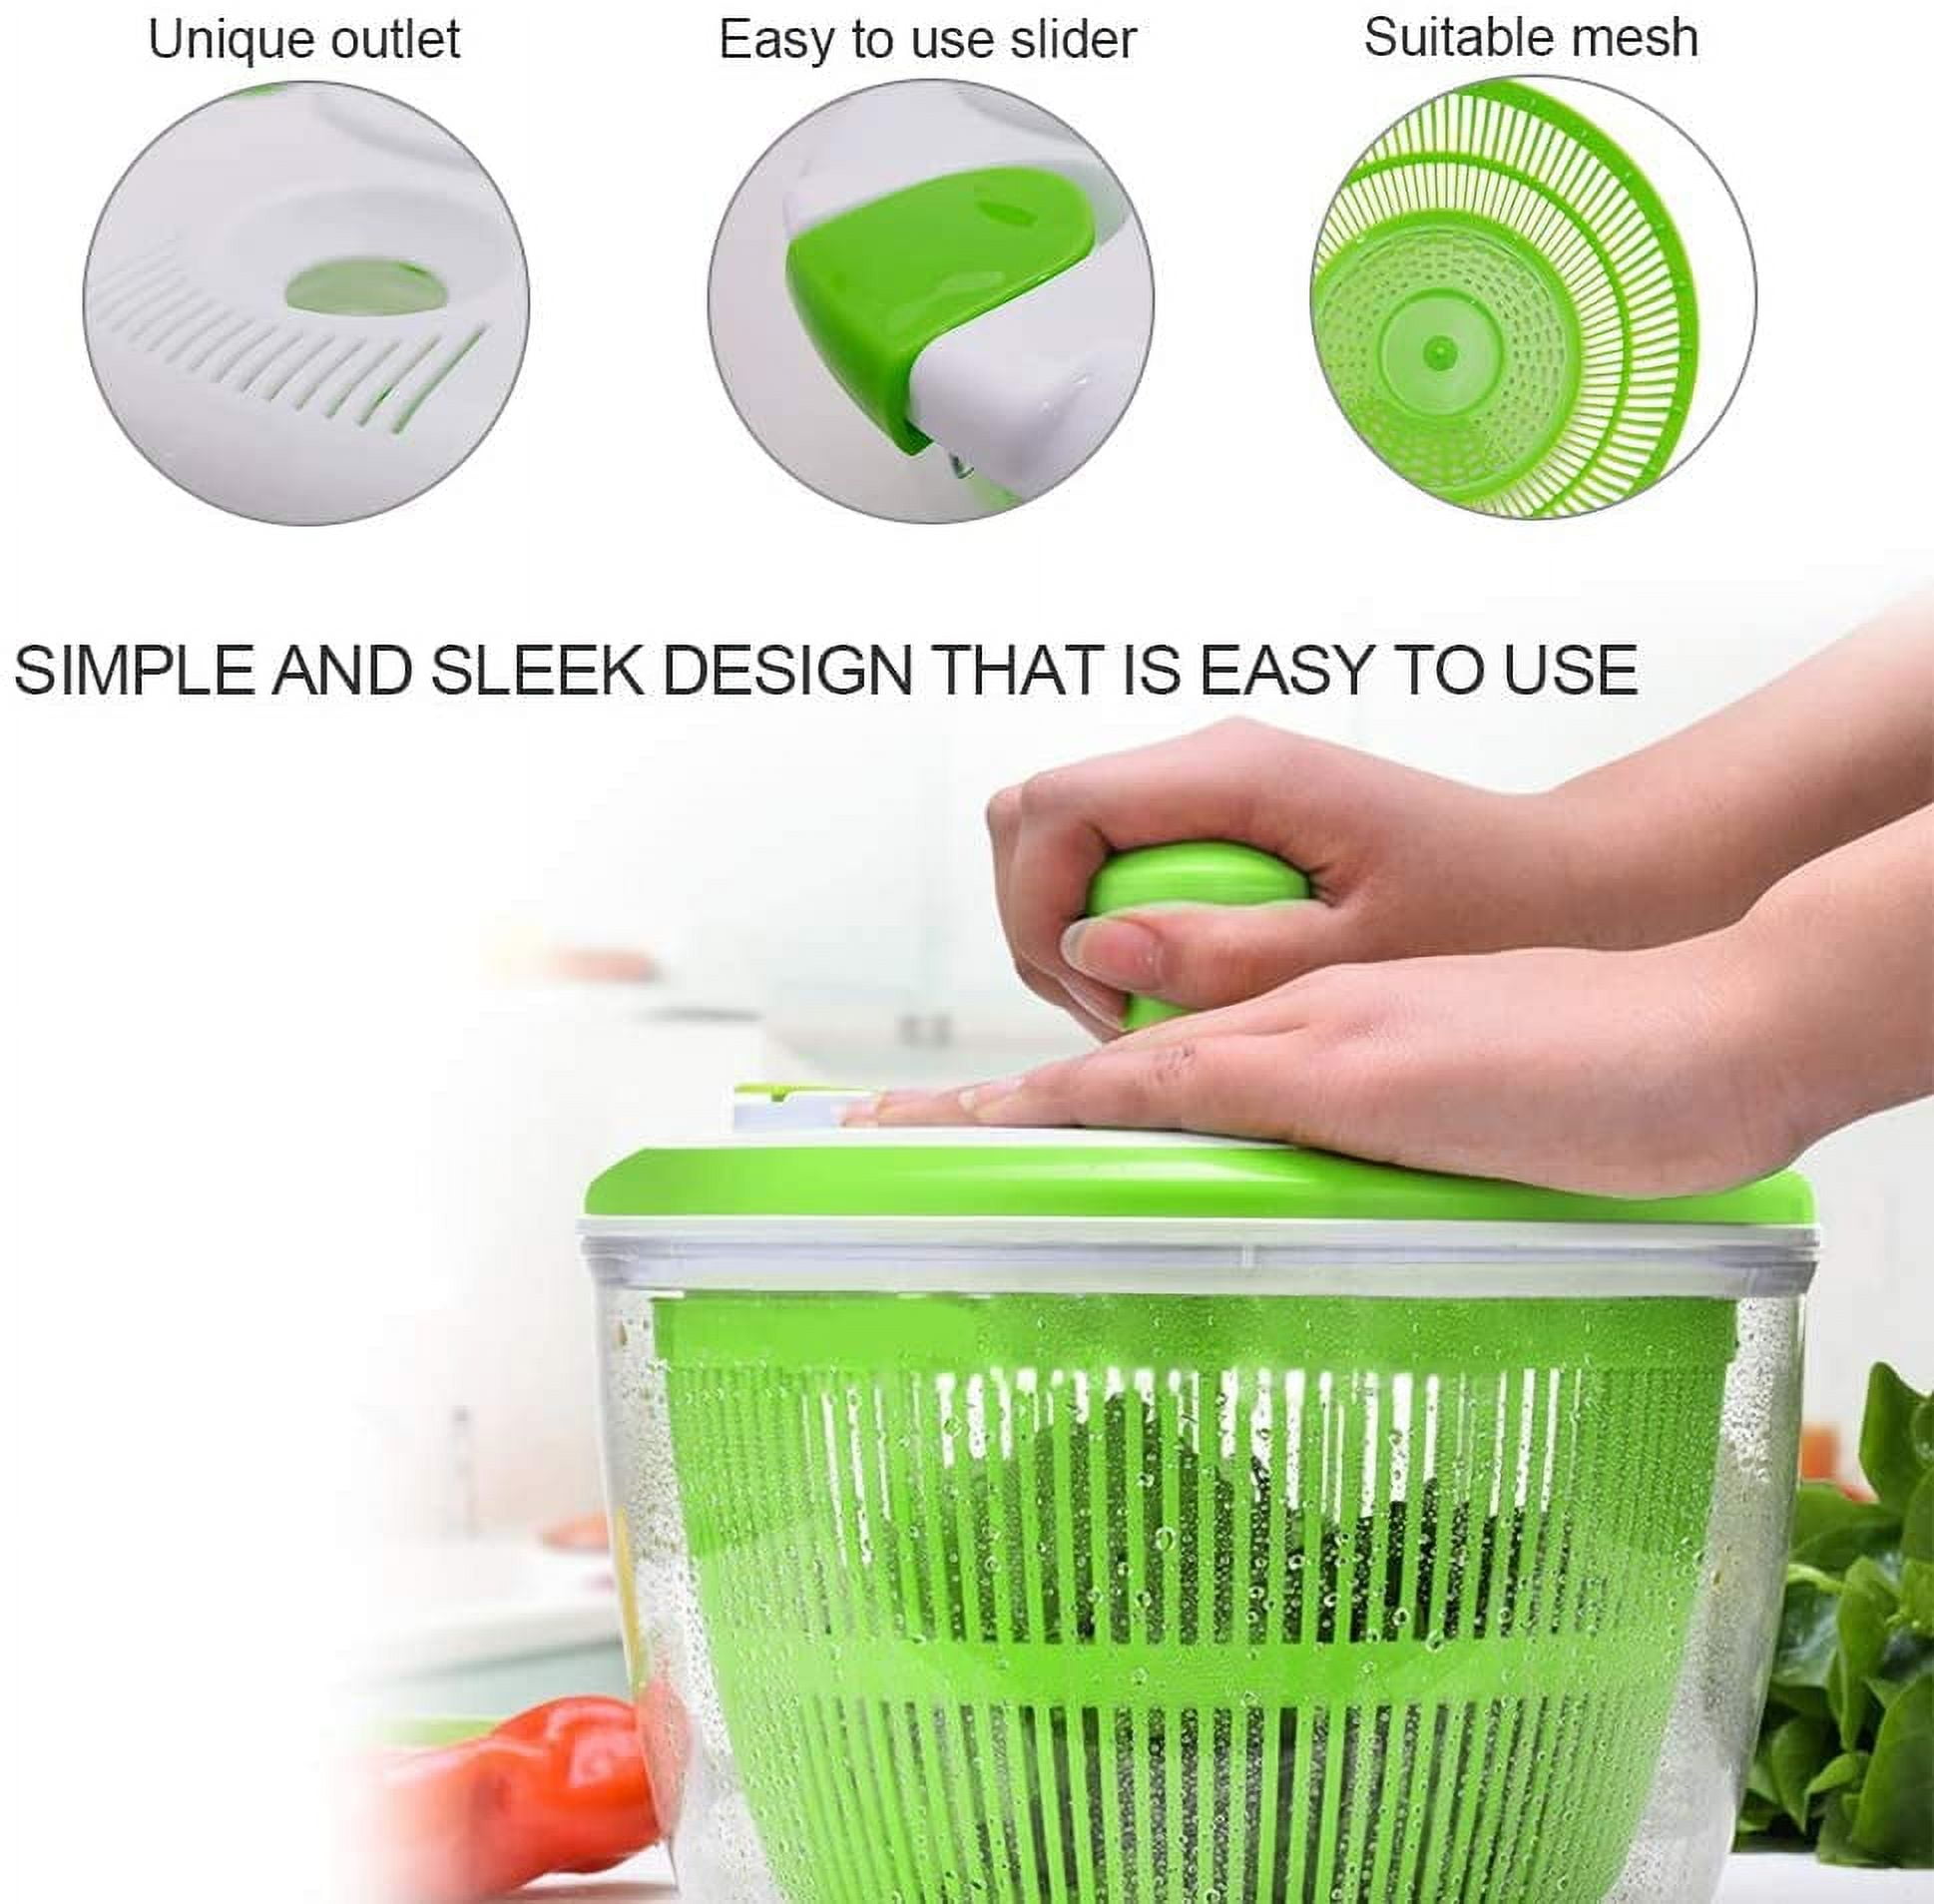 Zulay Kitchen Salad Spinner Large 5L Capacity - Manual Lettuce